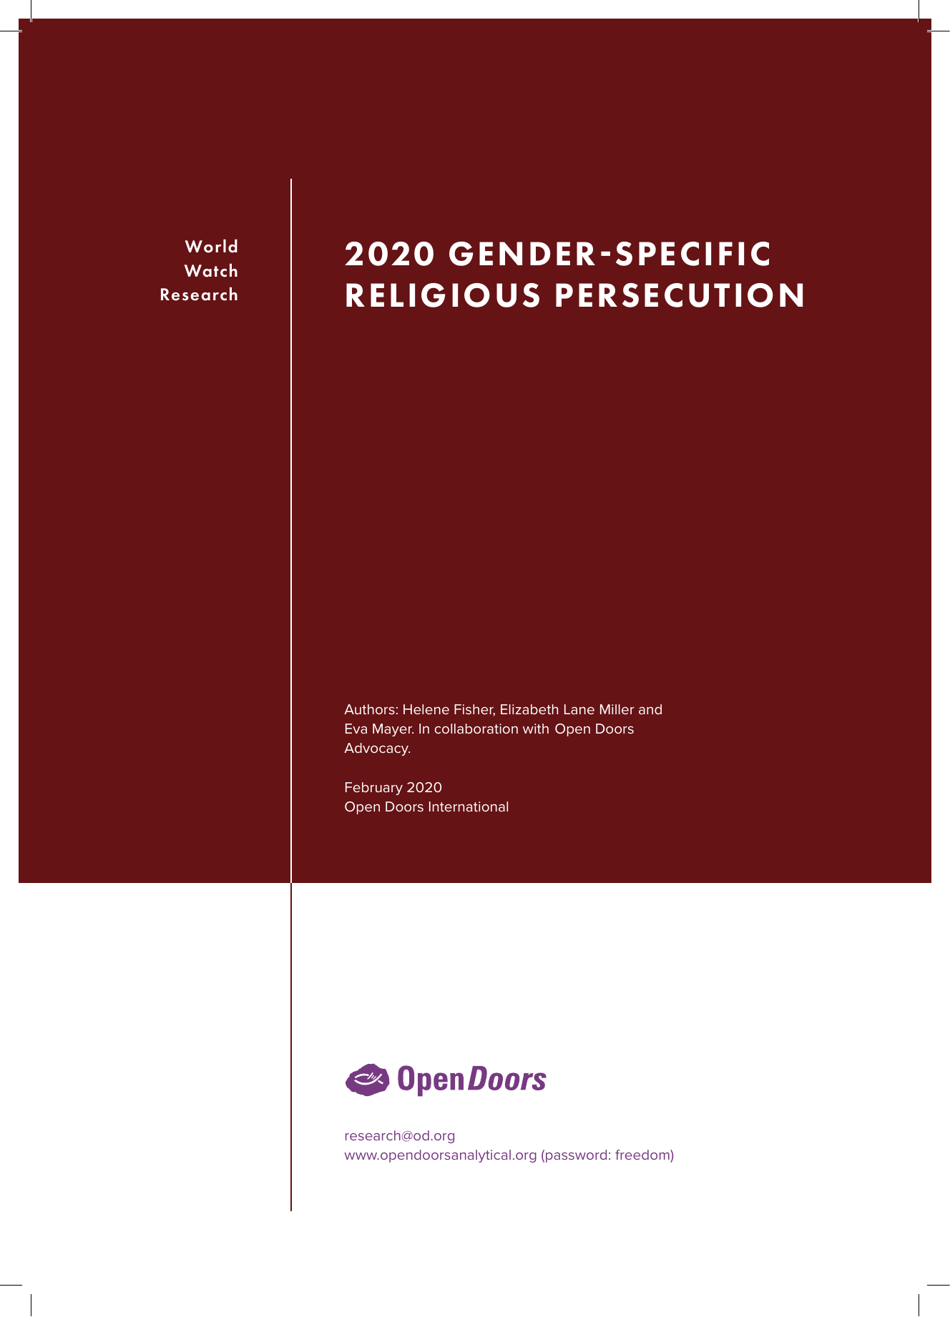 Preview of the 2020 Gender-Specific Religious Persecution document